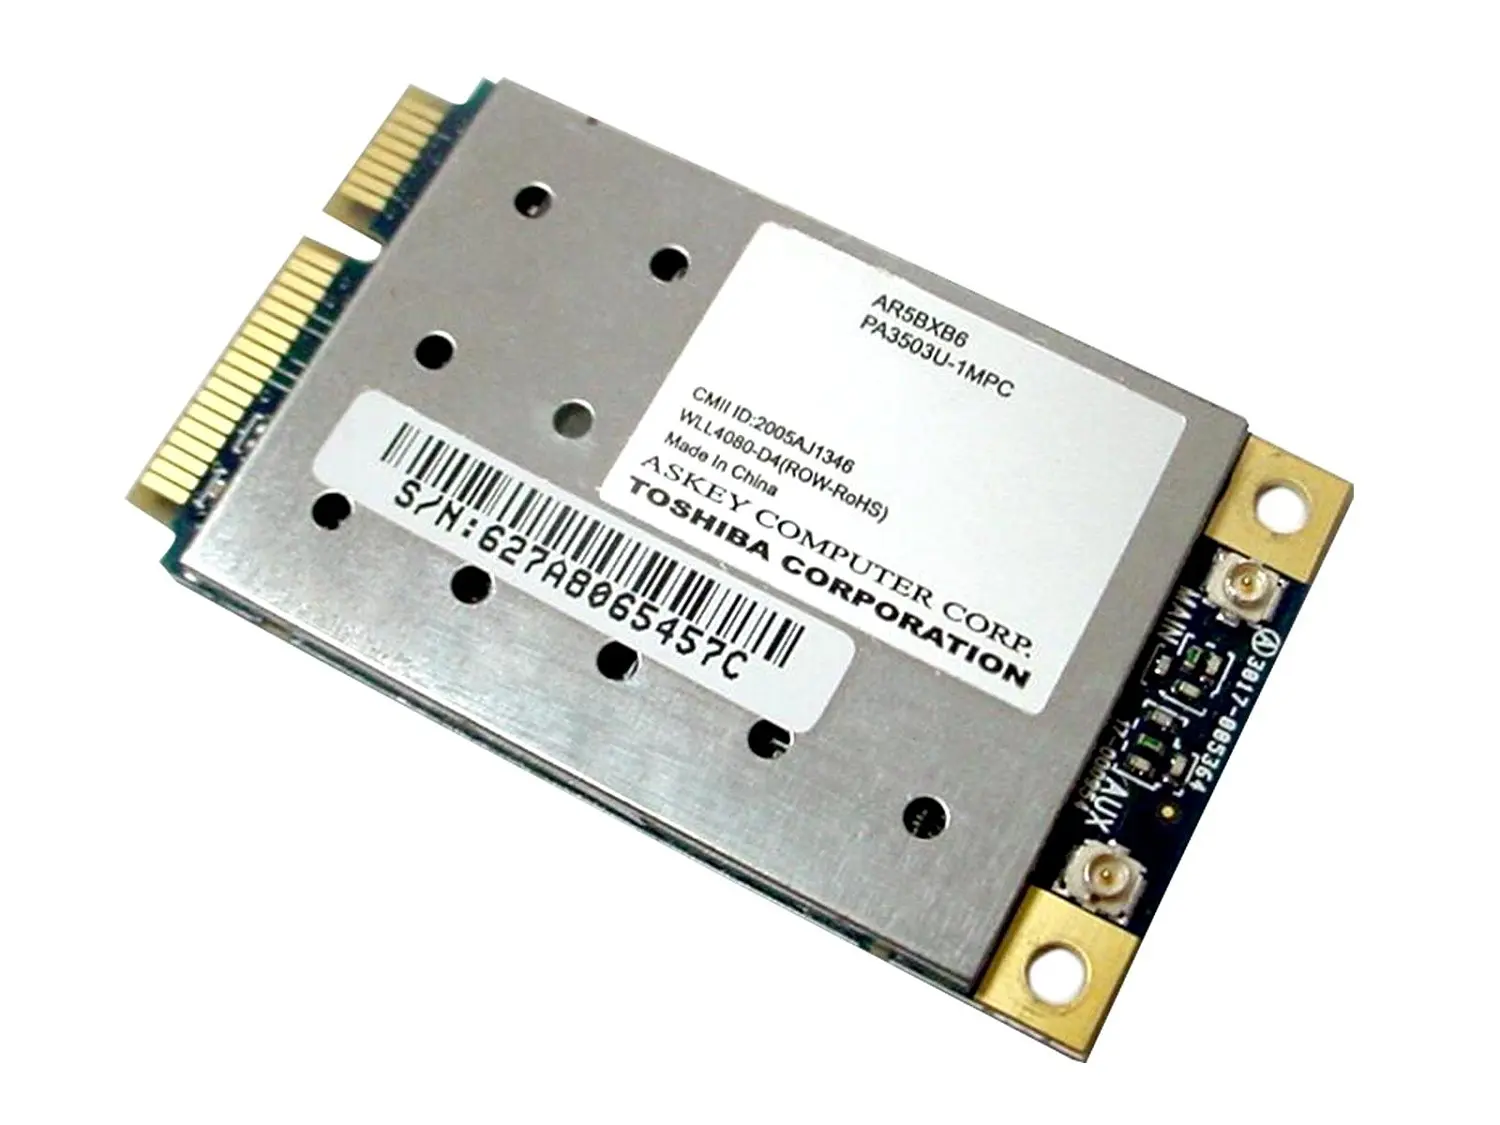 Atheros wireless drivers. Atheros ar9285 Wireless Network Adapter. Ethernet-контроллер Qualcomm Atheros ar8162/8166/8168 PCI-E fast Ethernet (NDIS 6.30). Qualcomm Atheros ar9341. Atheros ar928x Wireless Network Adapter.